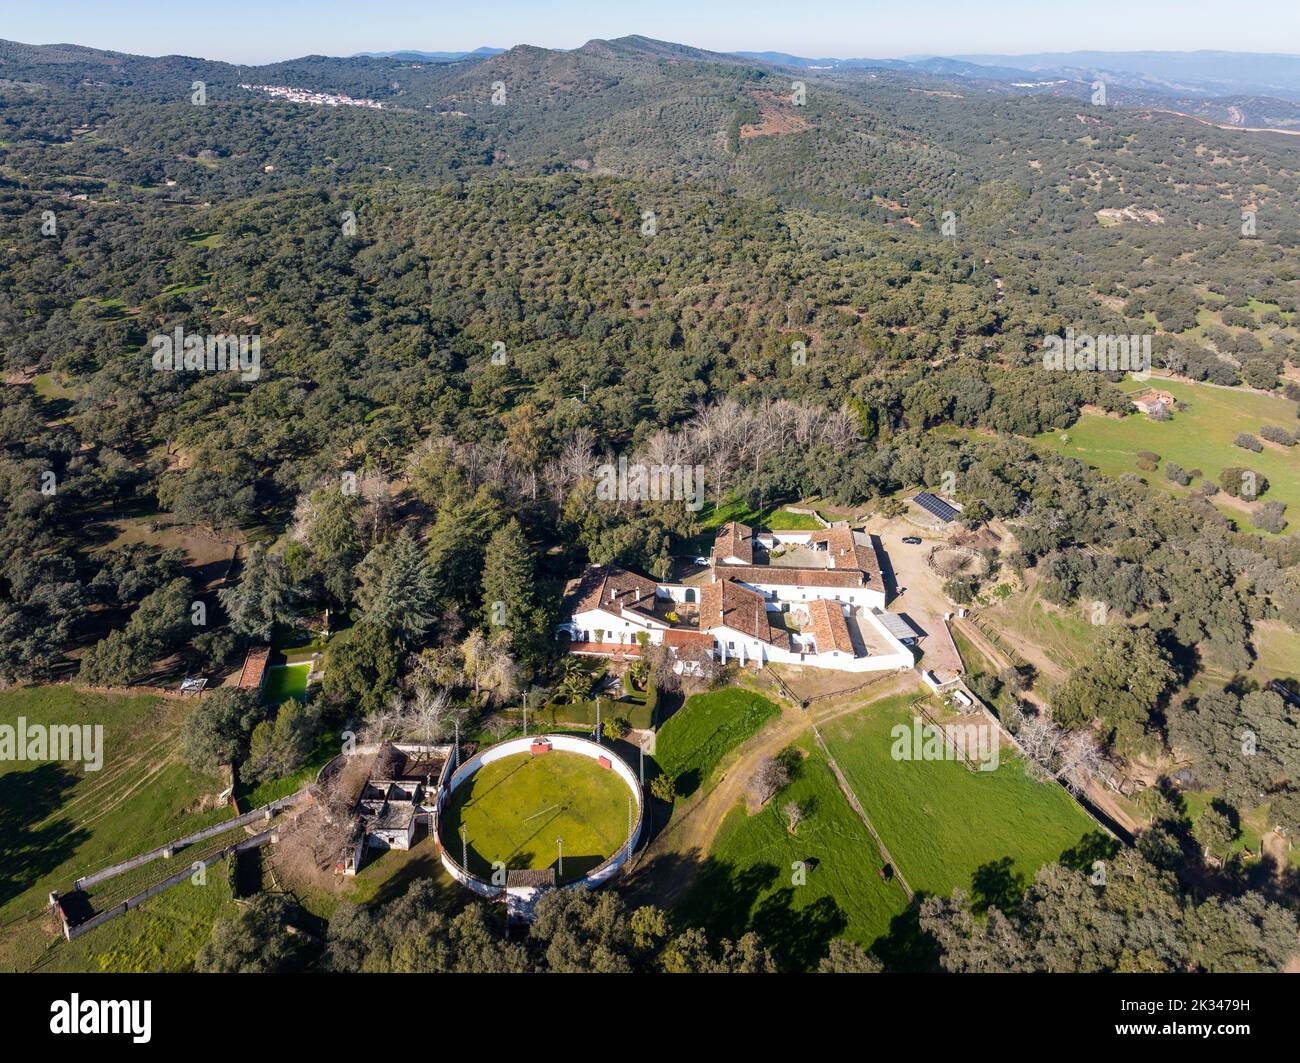 Country estate with own bullring in the Sierra de Aracena. aerial view, drone shot, Huelva province, Andalusia, Spain Stock Photo